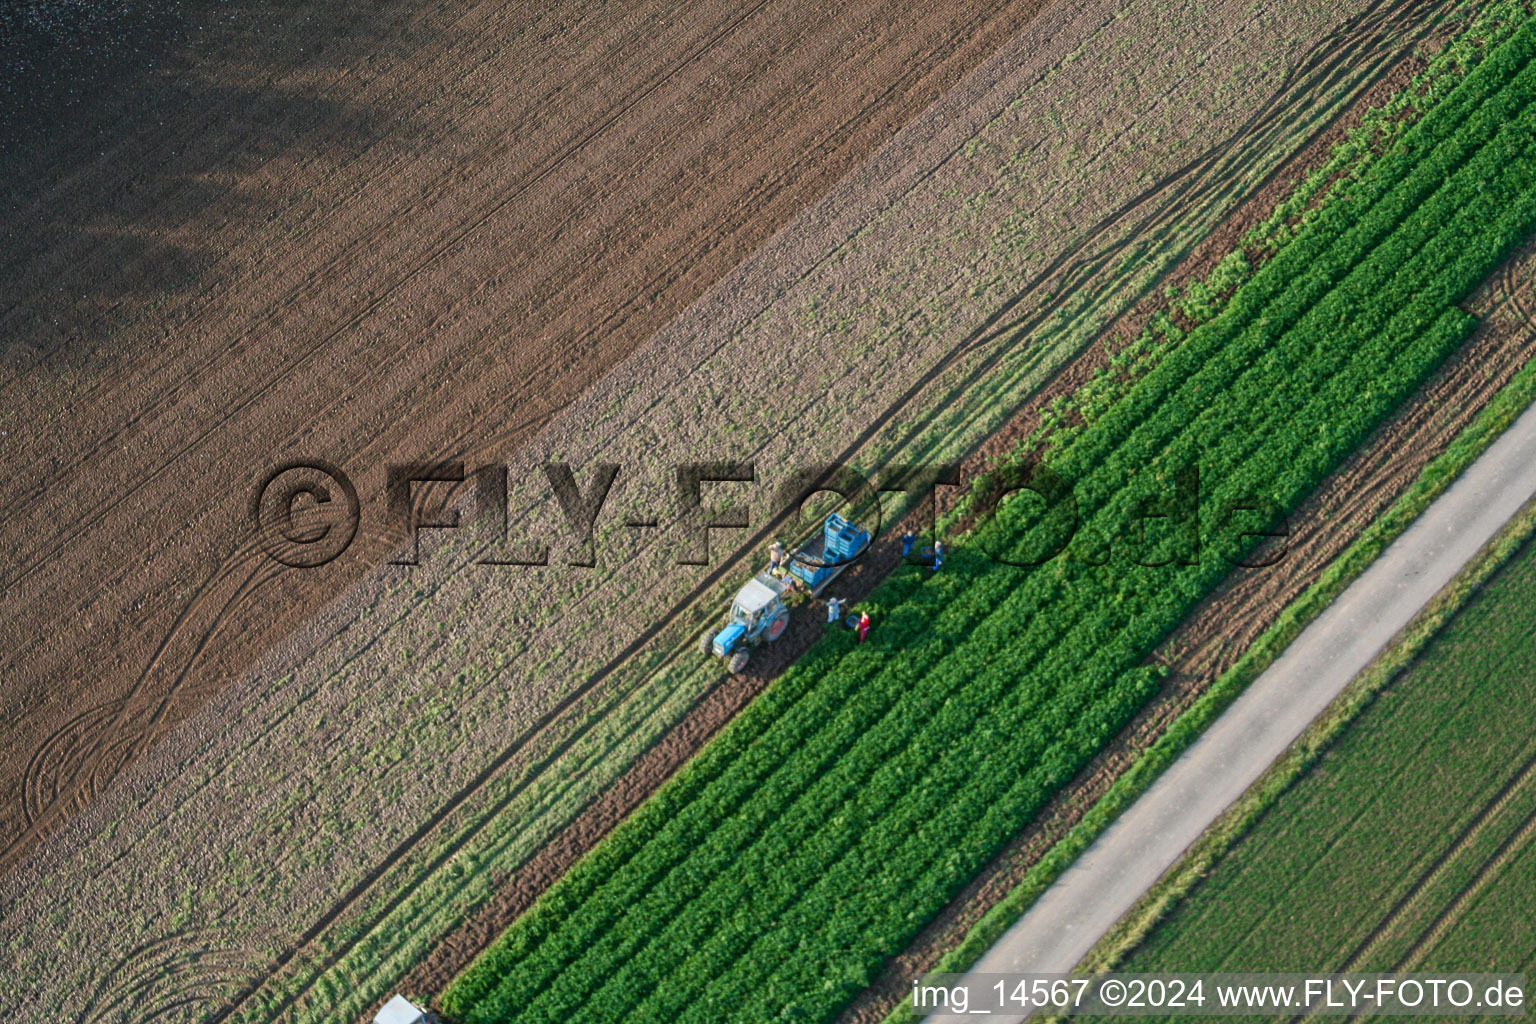 Tractor harvestinf vegetables on agricultural fields in Boebingen in the state Rhineland-Palatinate